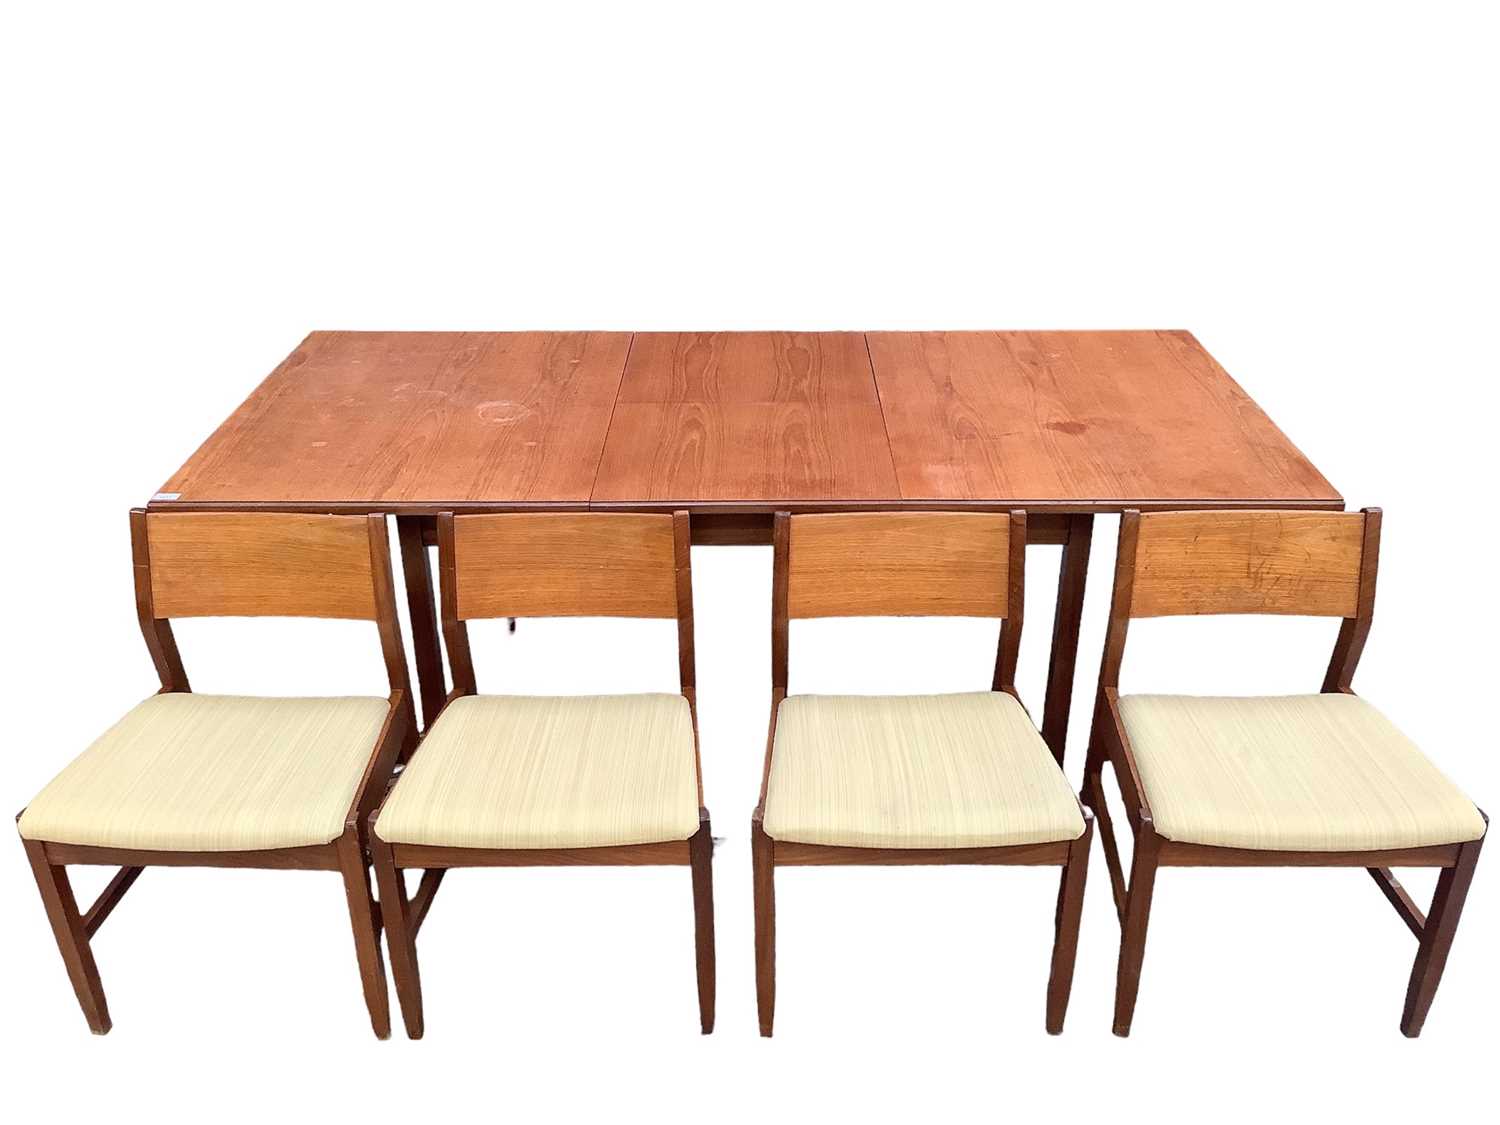 1960s teak table and set of four chairs by Windsor and Newton